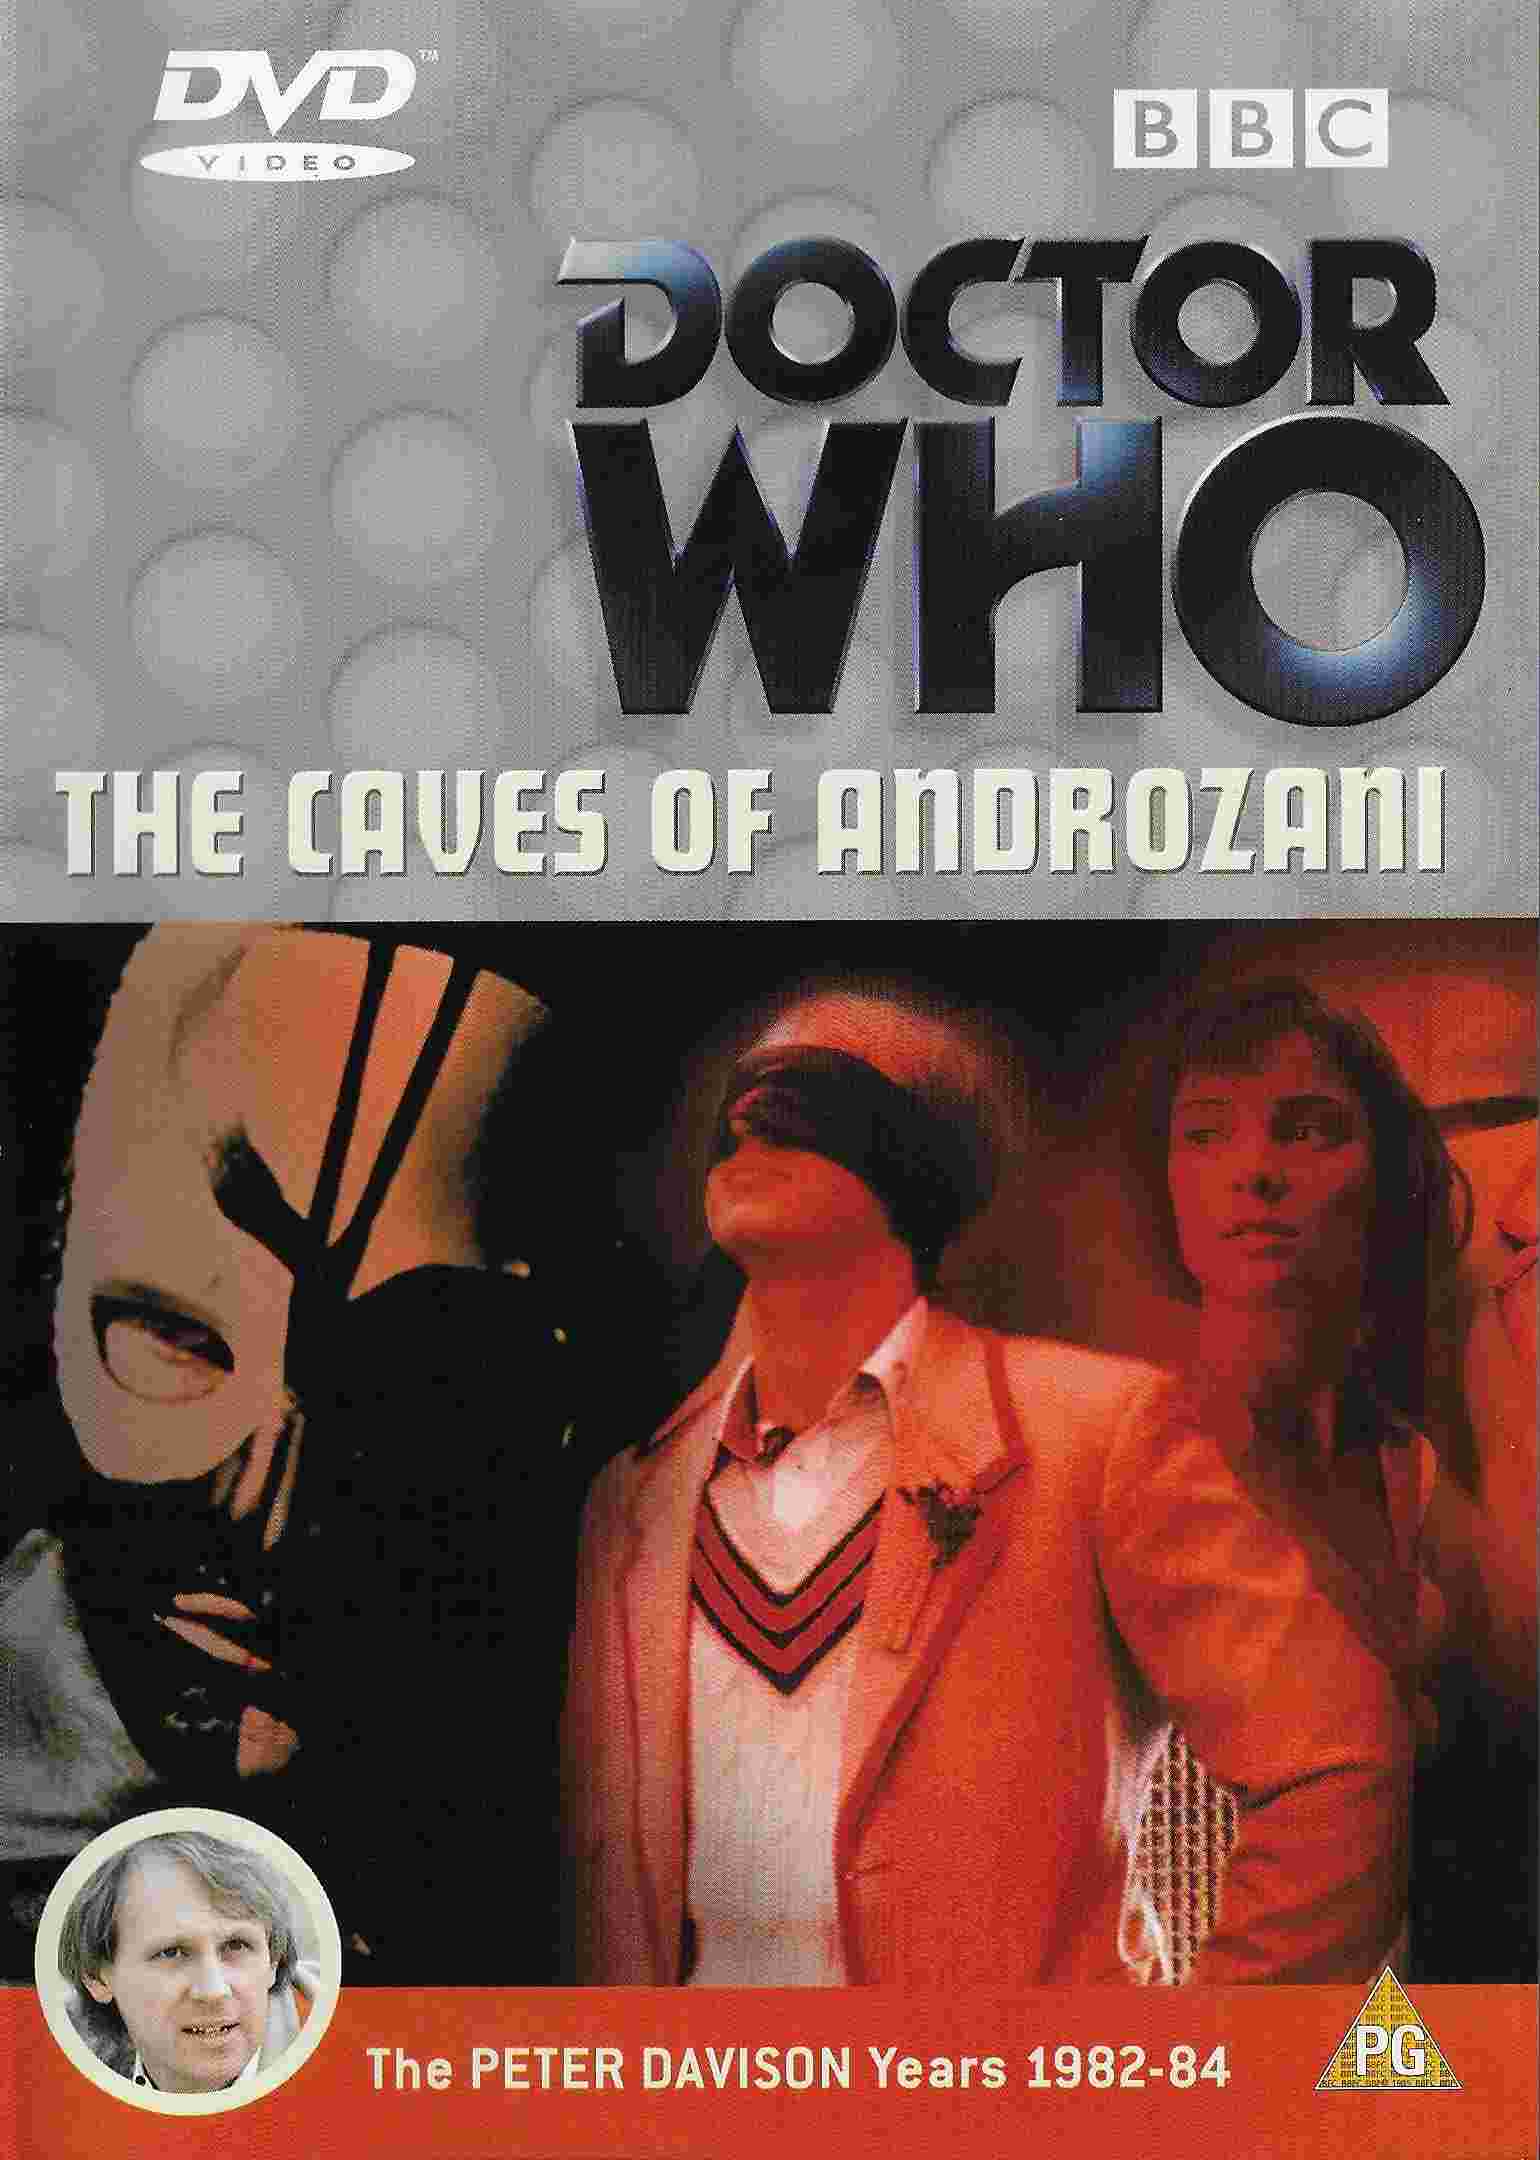 Picture of BBCDVD 1042 Doctor Who - The caves of Androzani by artist Robert Holmes from the BBC records and Tapes library